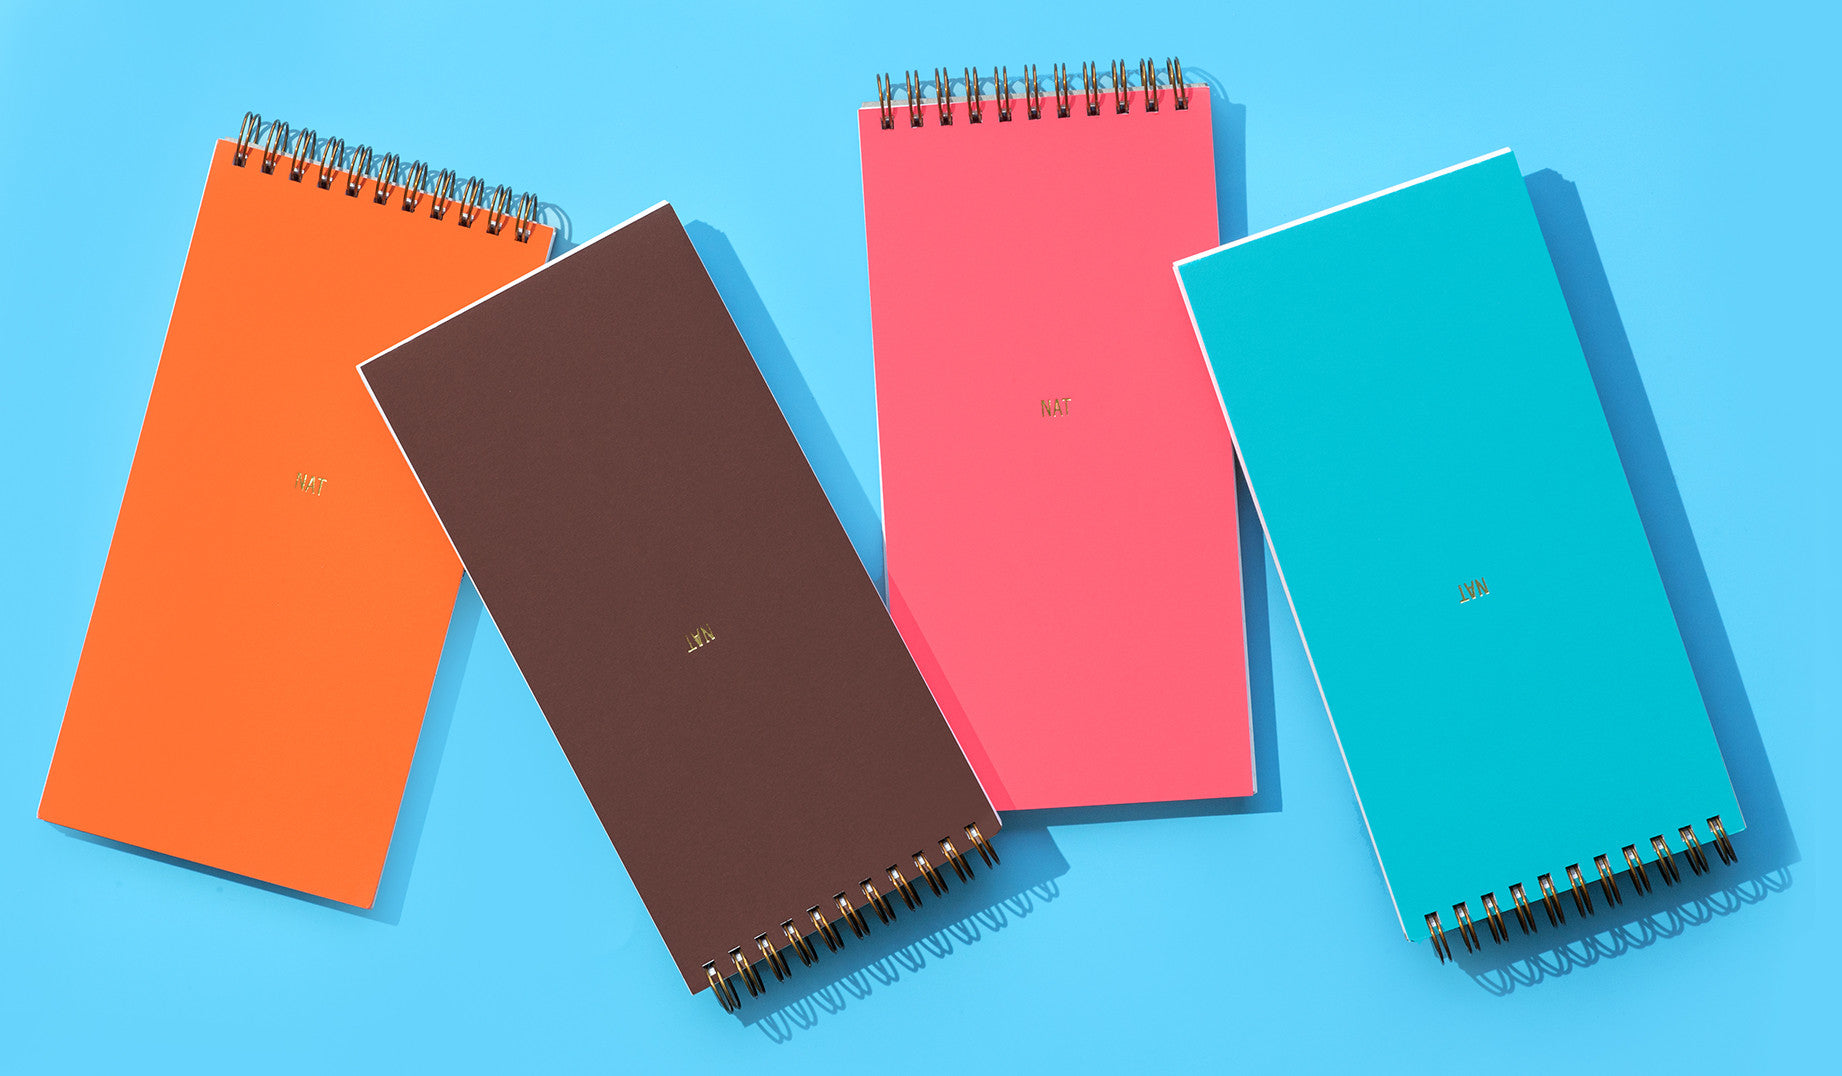 Based on the format of the traditional reporter's notebook, Commune's Designer's Notebooks add beauty to functionality with brightly colored covers in premium Astrobright papers and custom gold monogramming. Sold in sets of four with one each of Orbit Orange, Rocket Red, Terrestrial Teal, and Jupiter Java colored covers. Approximately 90 lined pages per notebook. 